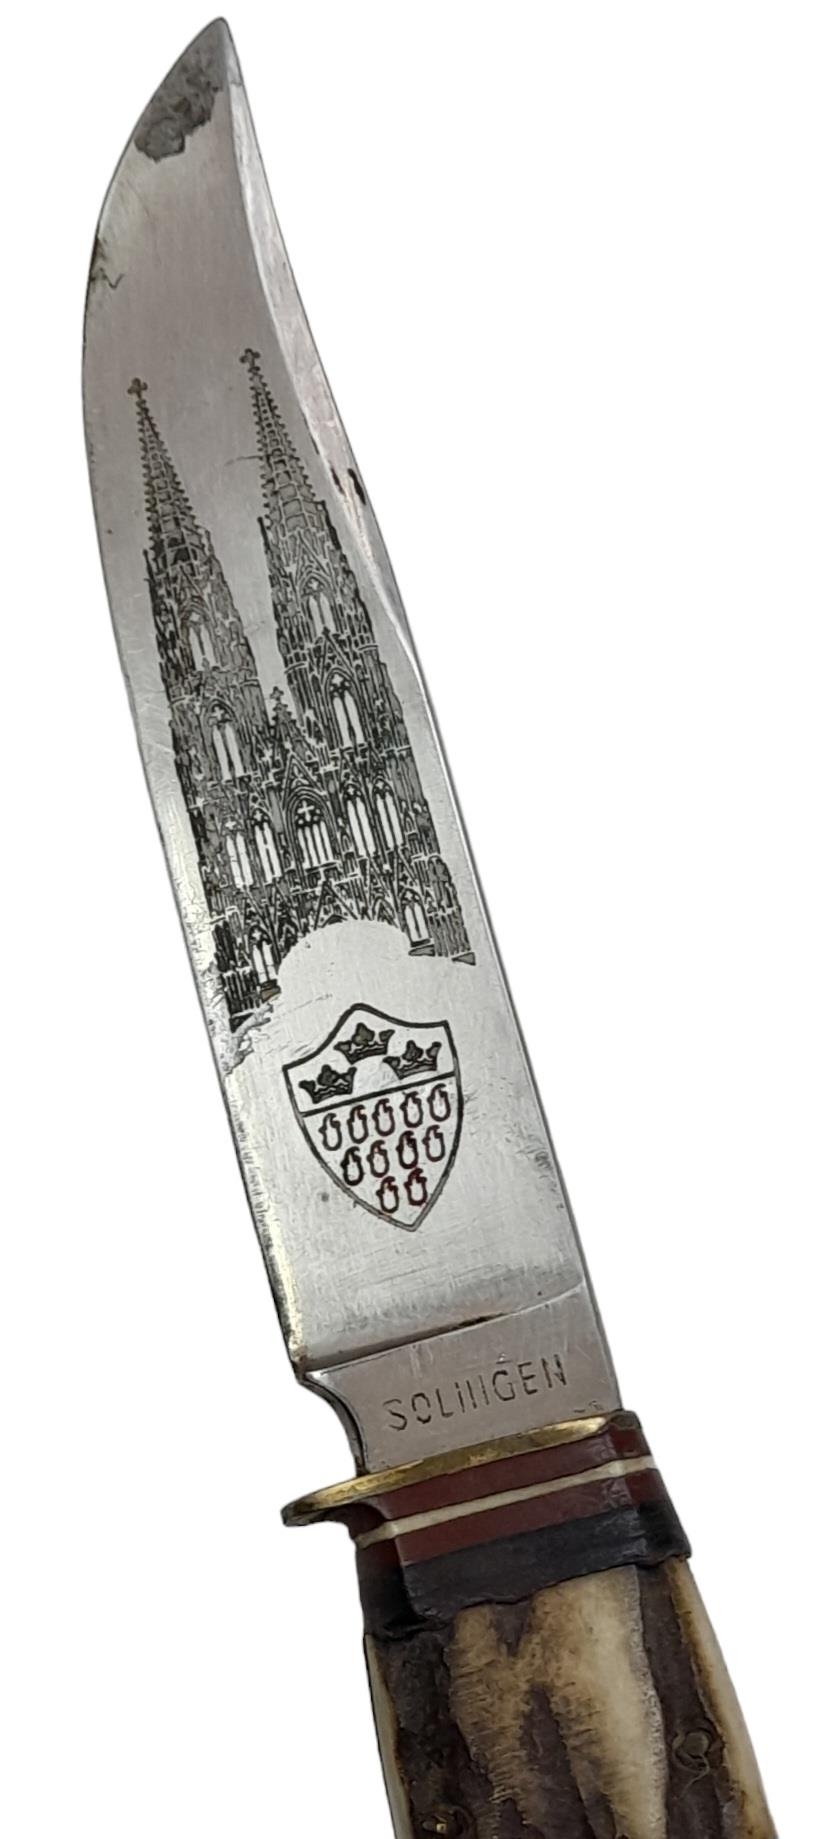 3rd Reich Hitler Youth Sheath Knife with acid etched blade dedicated to the 12th SS (Hitler Youth) - Image 2 of 5